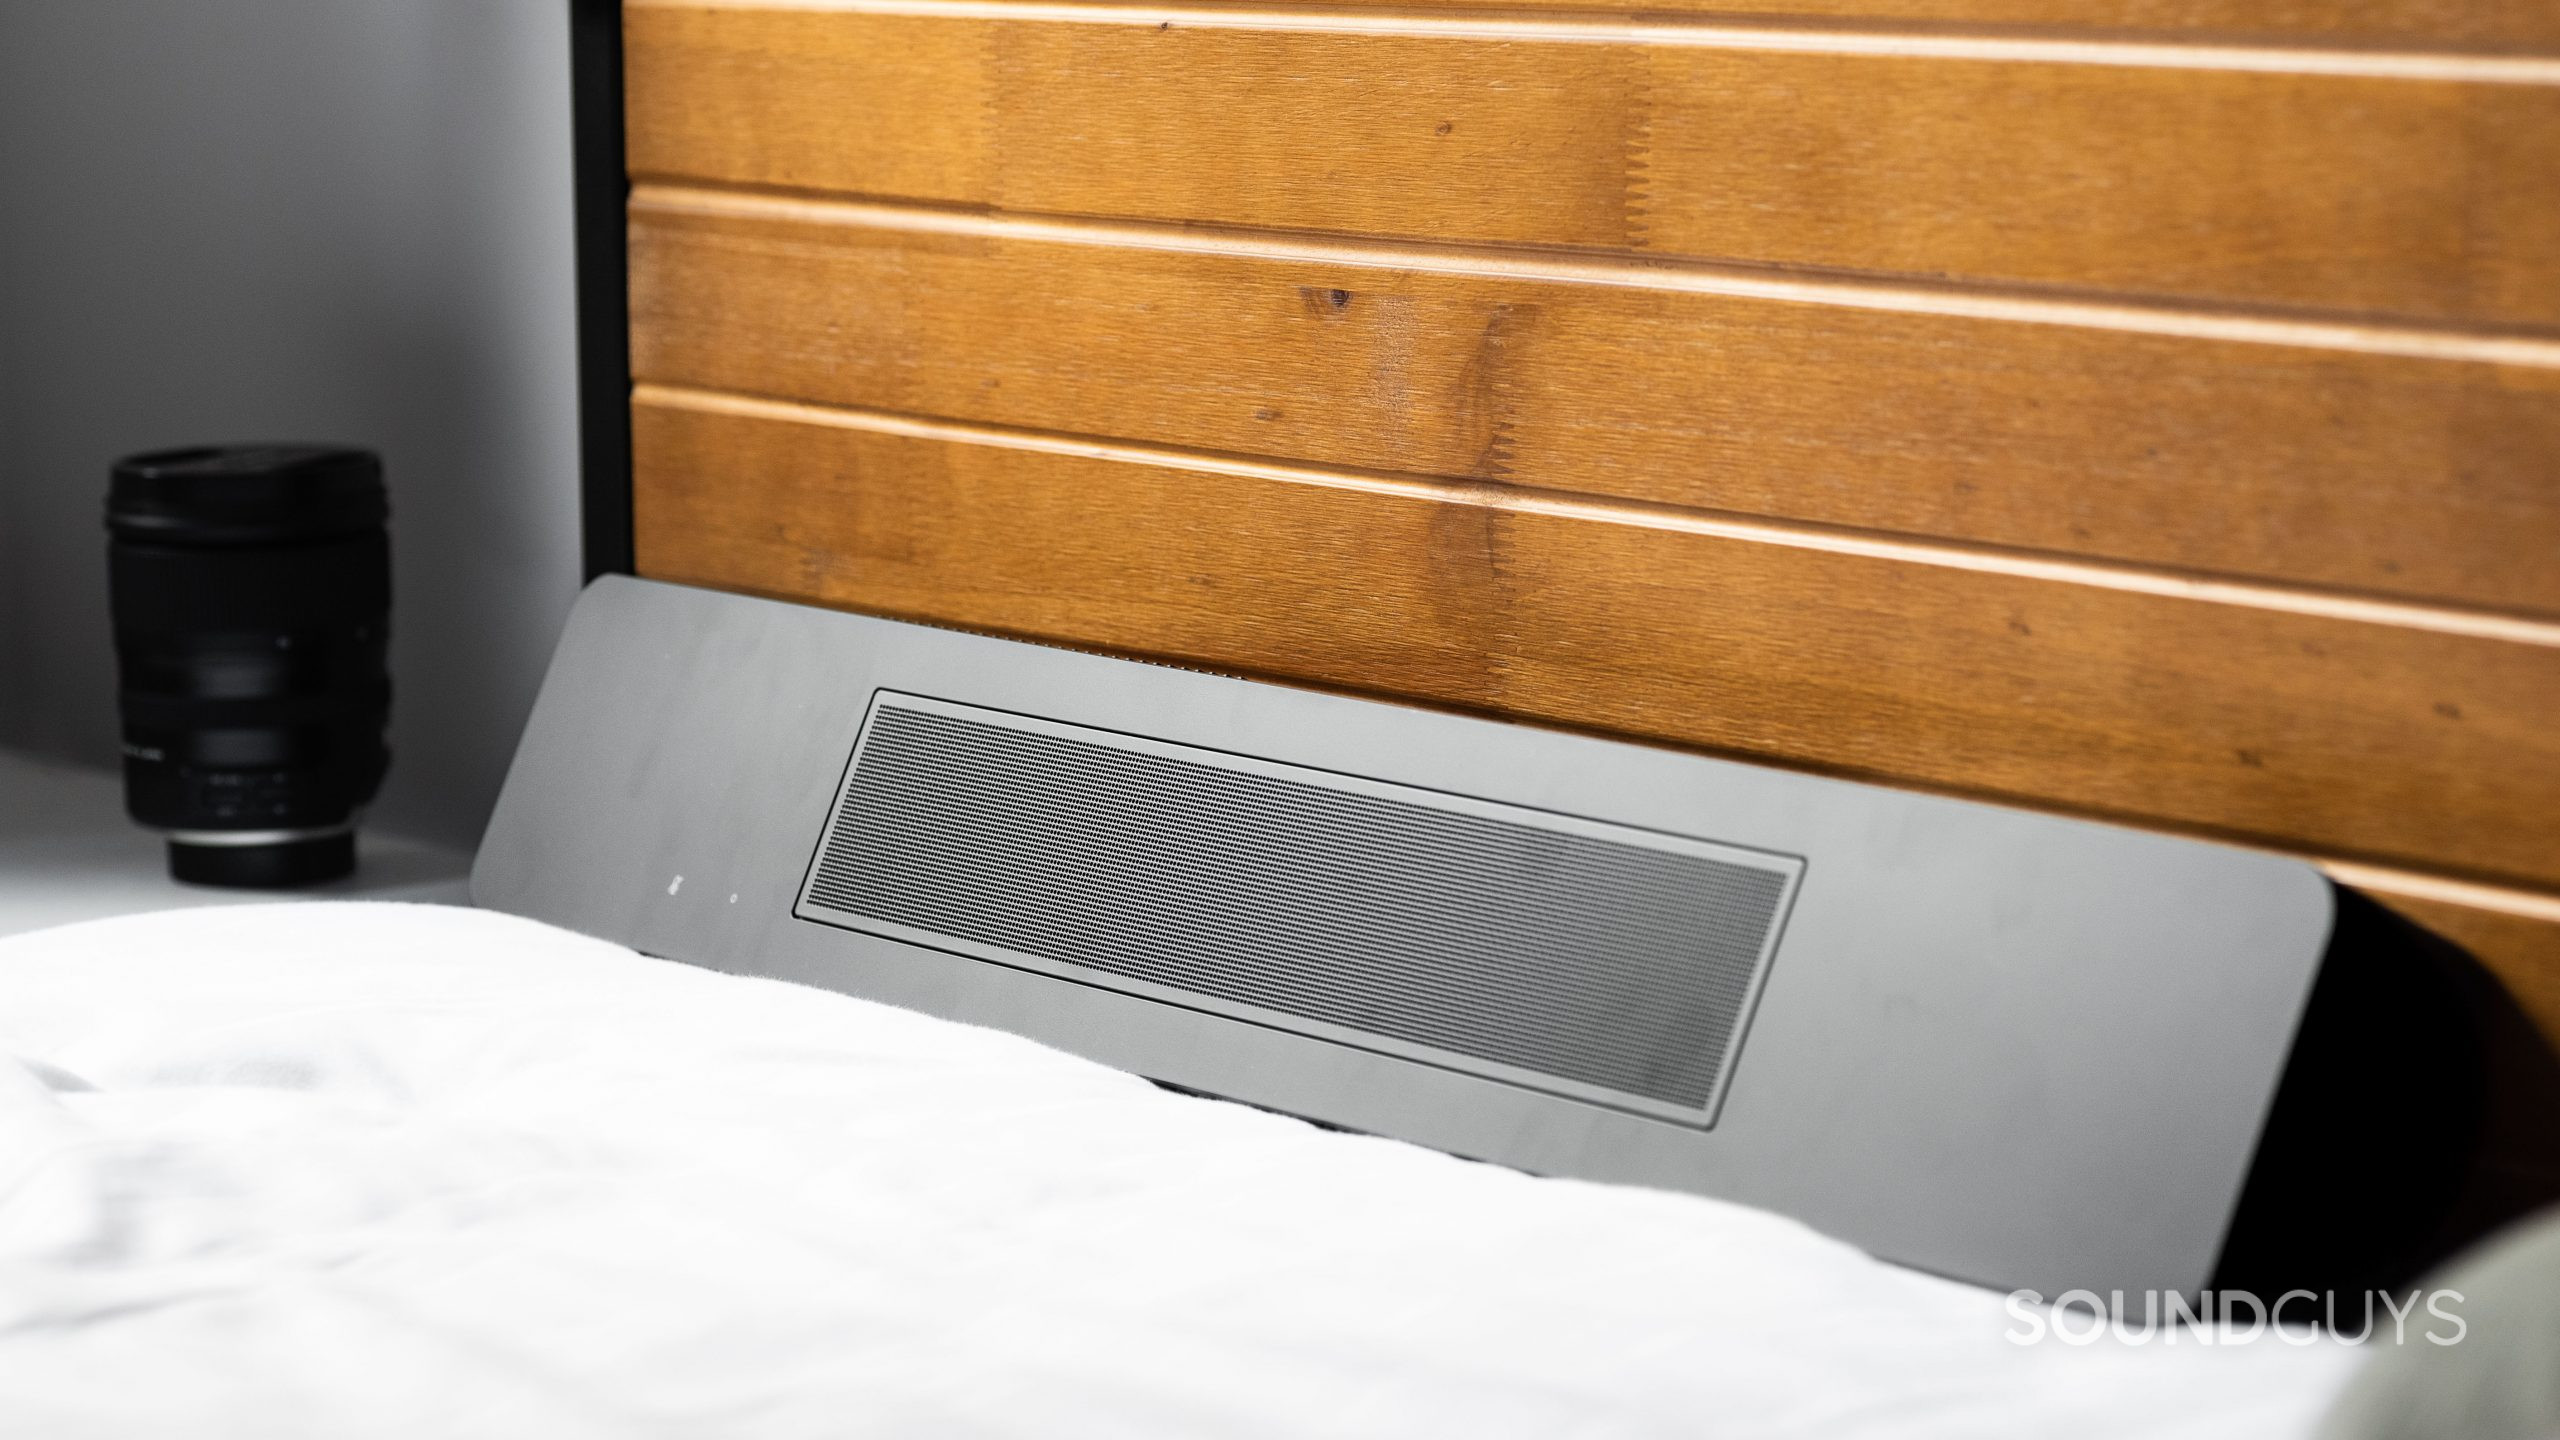 The top of the Bose Smart Soundbar 600 rests against a wooden surface.